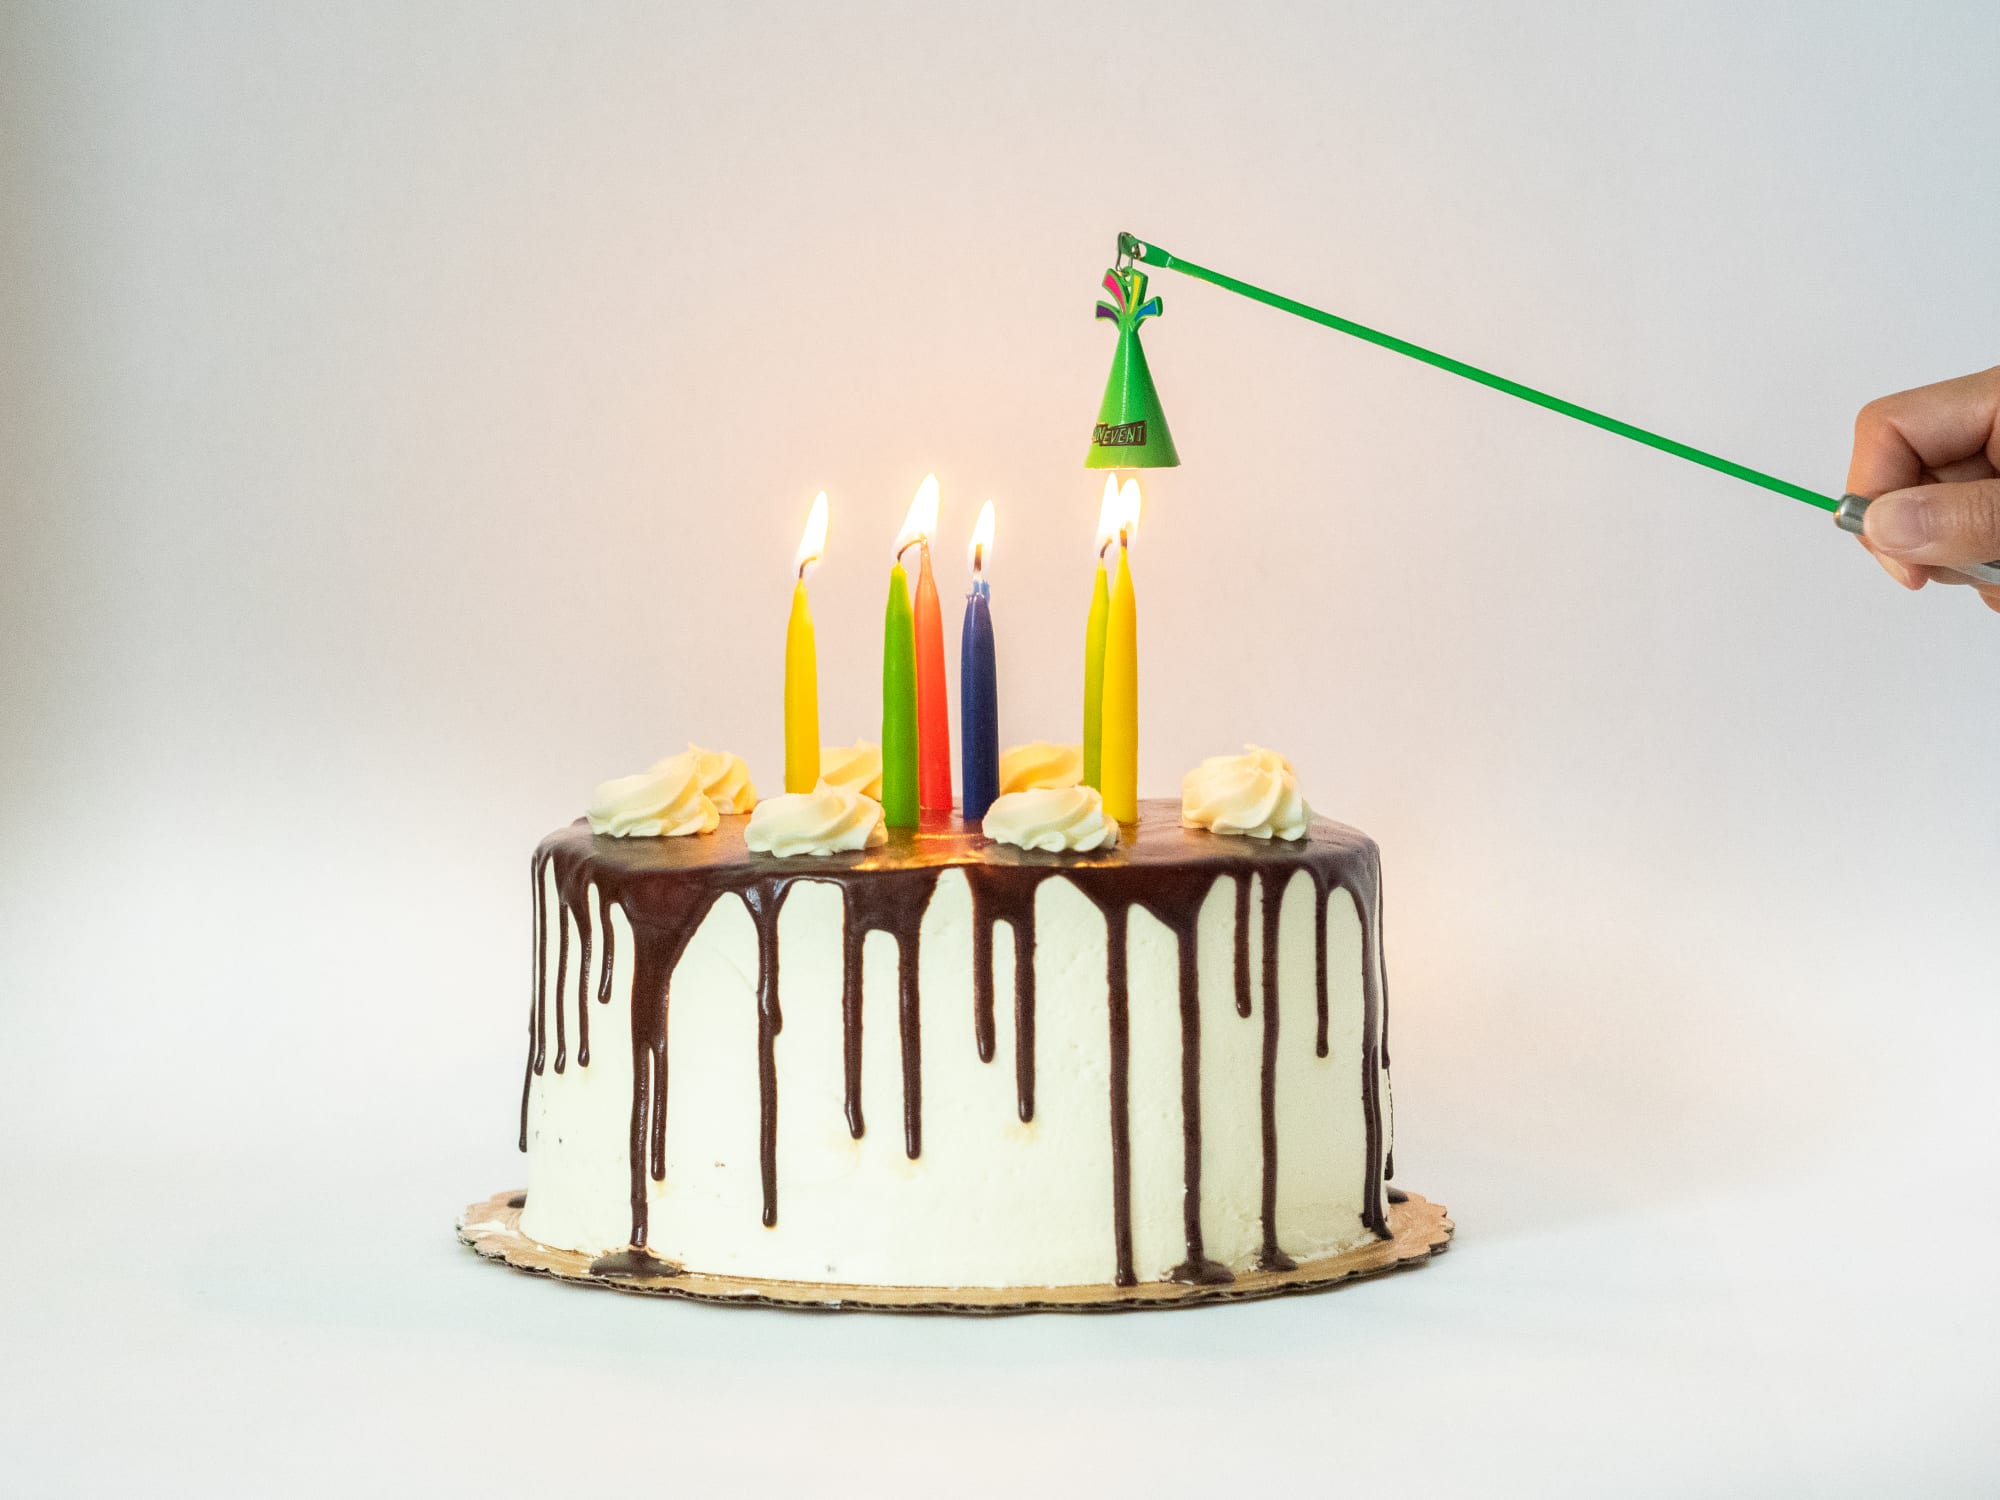 2,579 Birthday Cake No Candles Images, Stock Photos & Vectors | Shutterstock